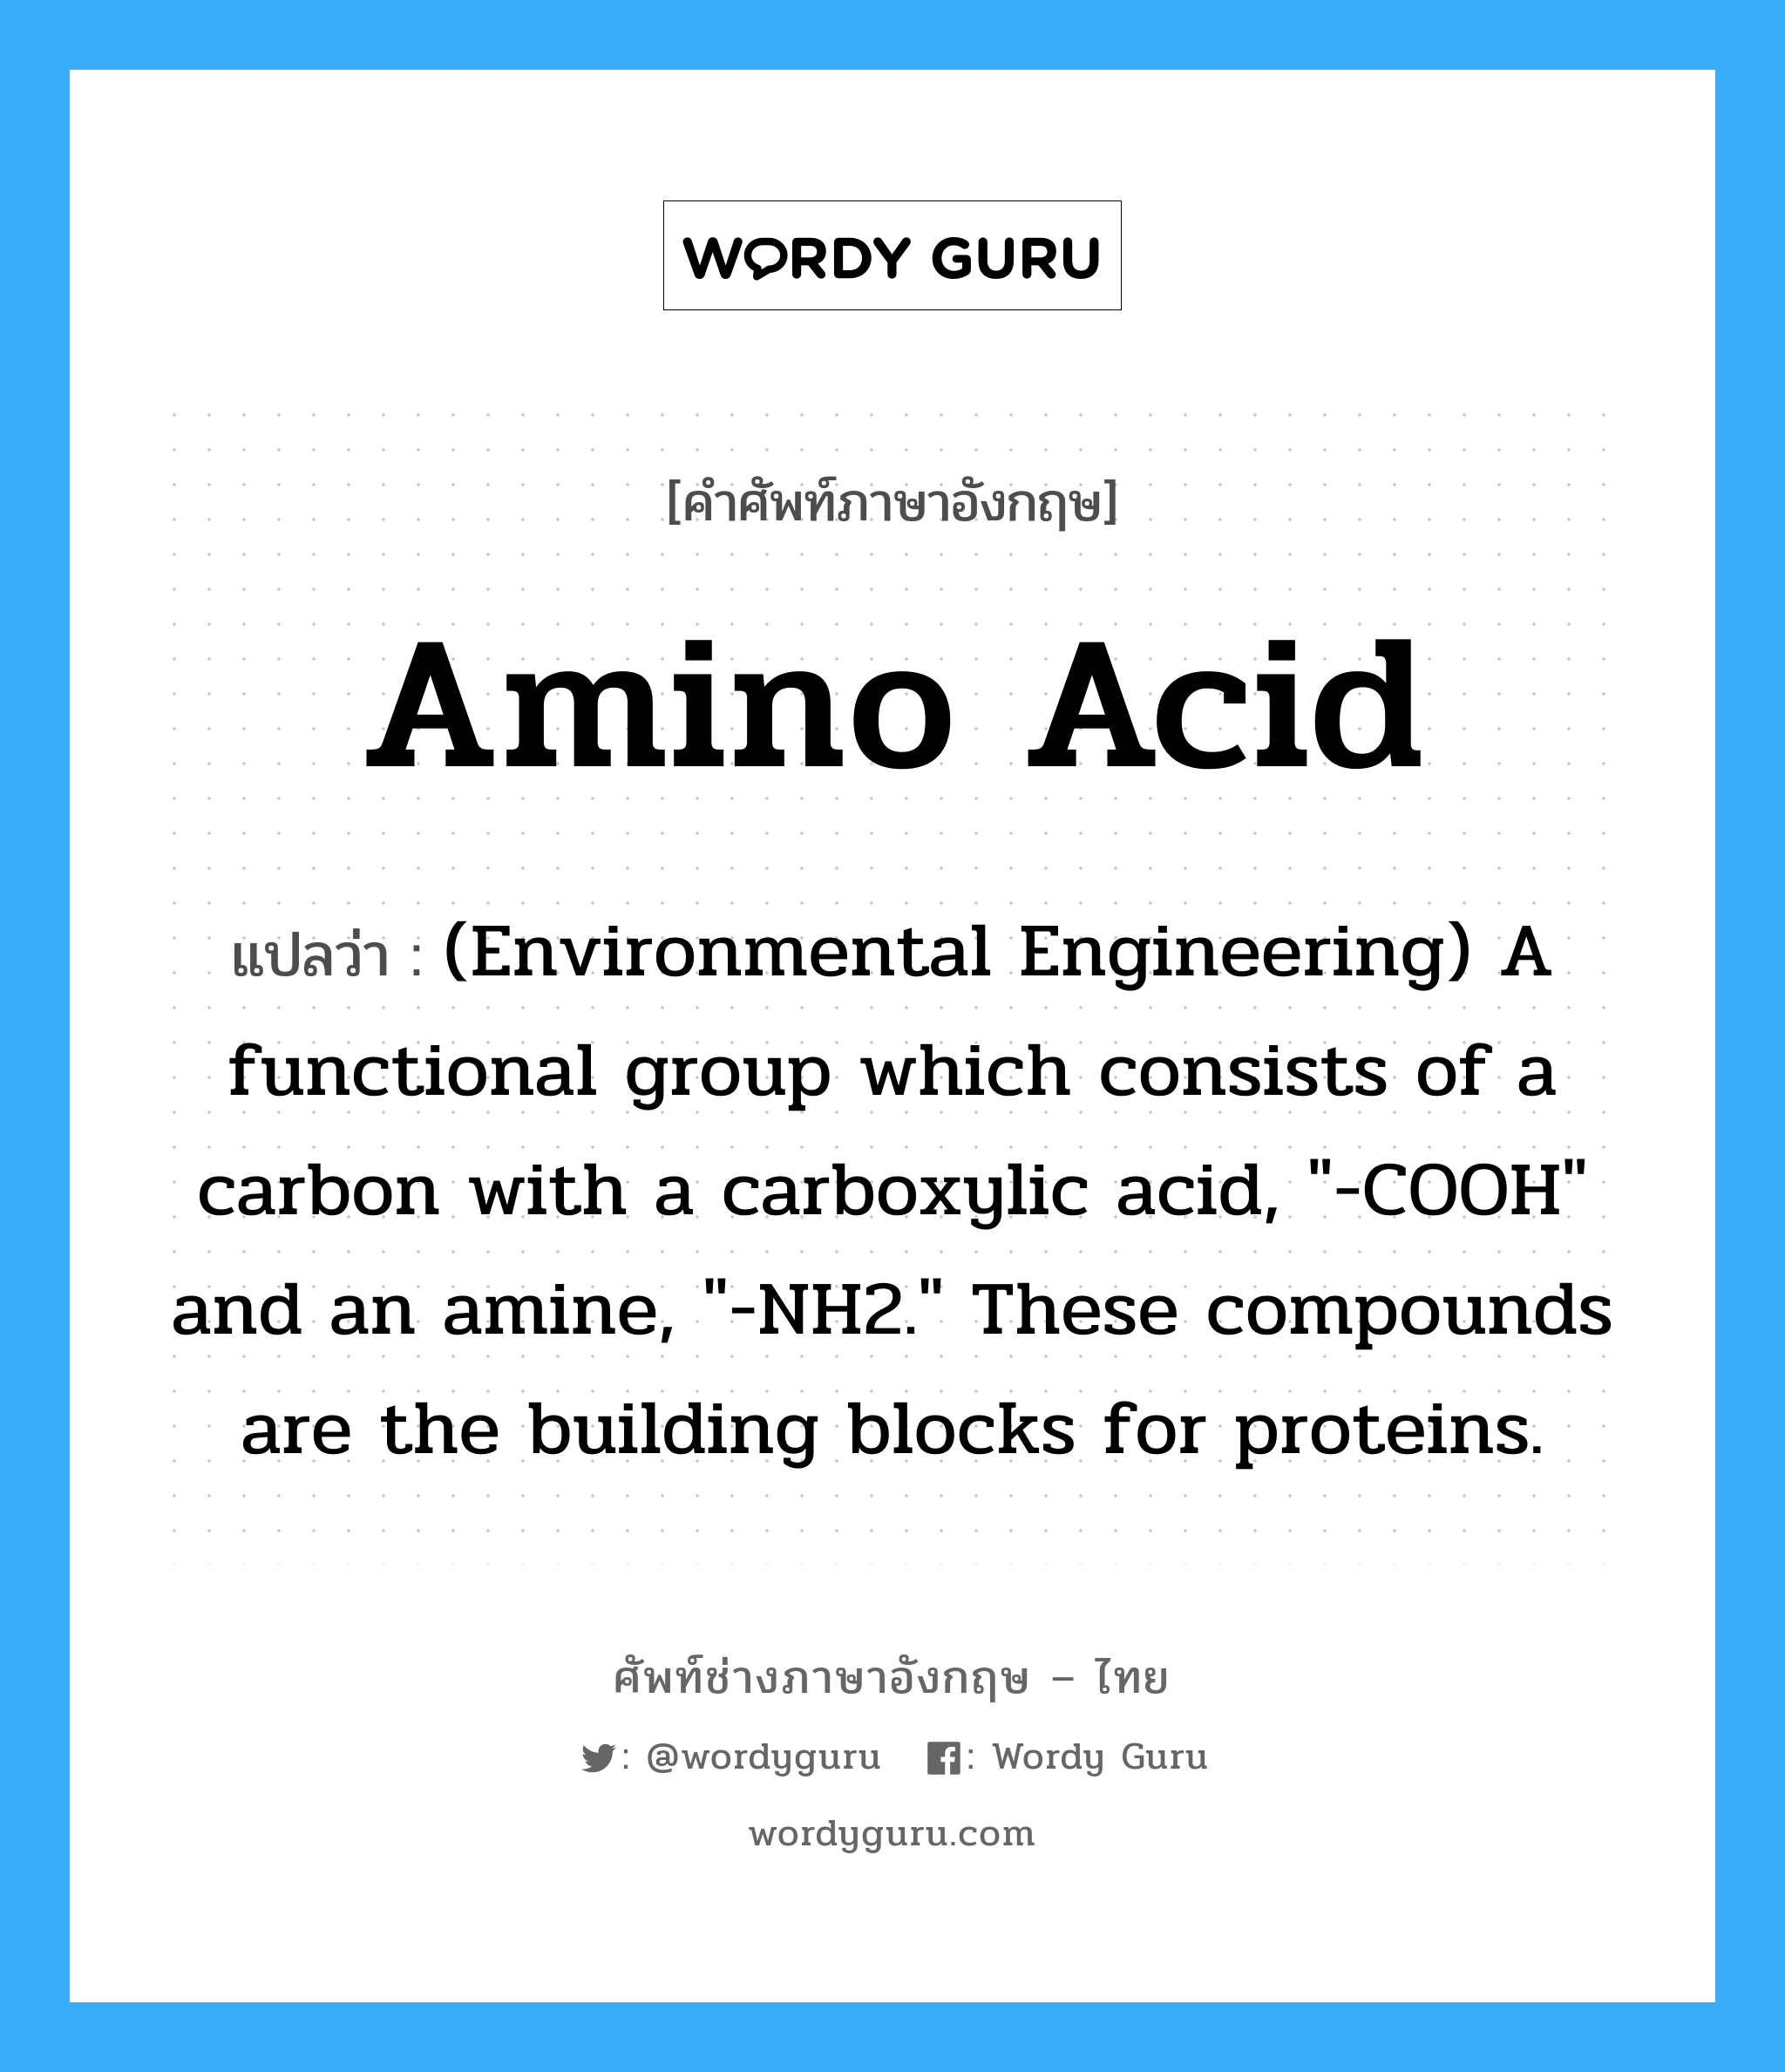 Amino acid แปลว่า?, คำศัพท์ช่างภาษาอังกฤษ - ไทย Amino acid คำศัพท์ภาษาอังกฤษ Amino acid แปลว่า (Environmental Engineering) A functional group which consists of a carbon with a carboxylic acid, "-COOH" and an amine, "-NH2." These compounds are the building blocks for proteins.